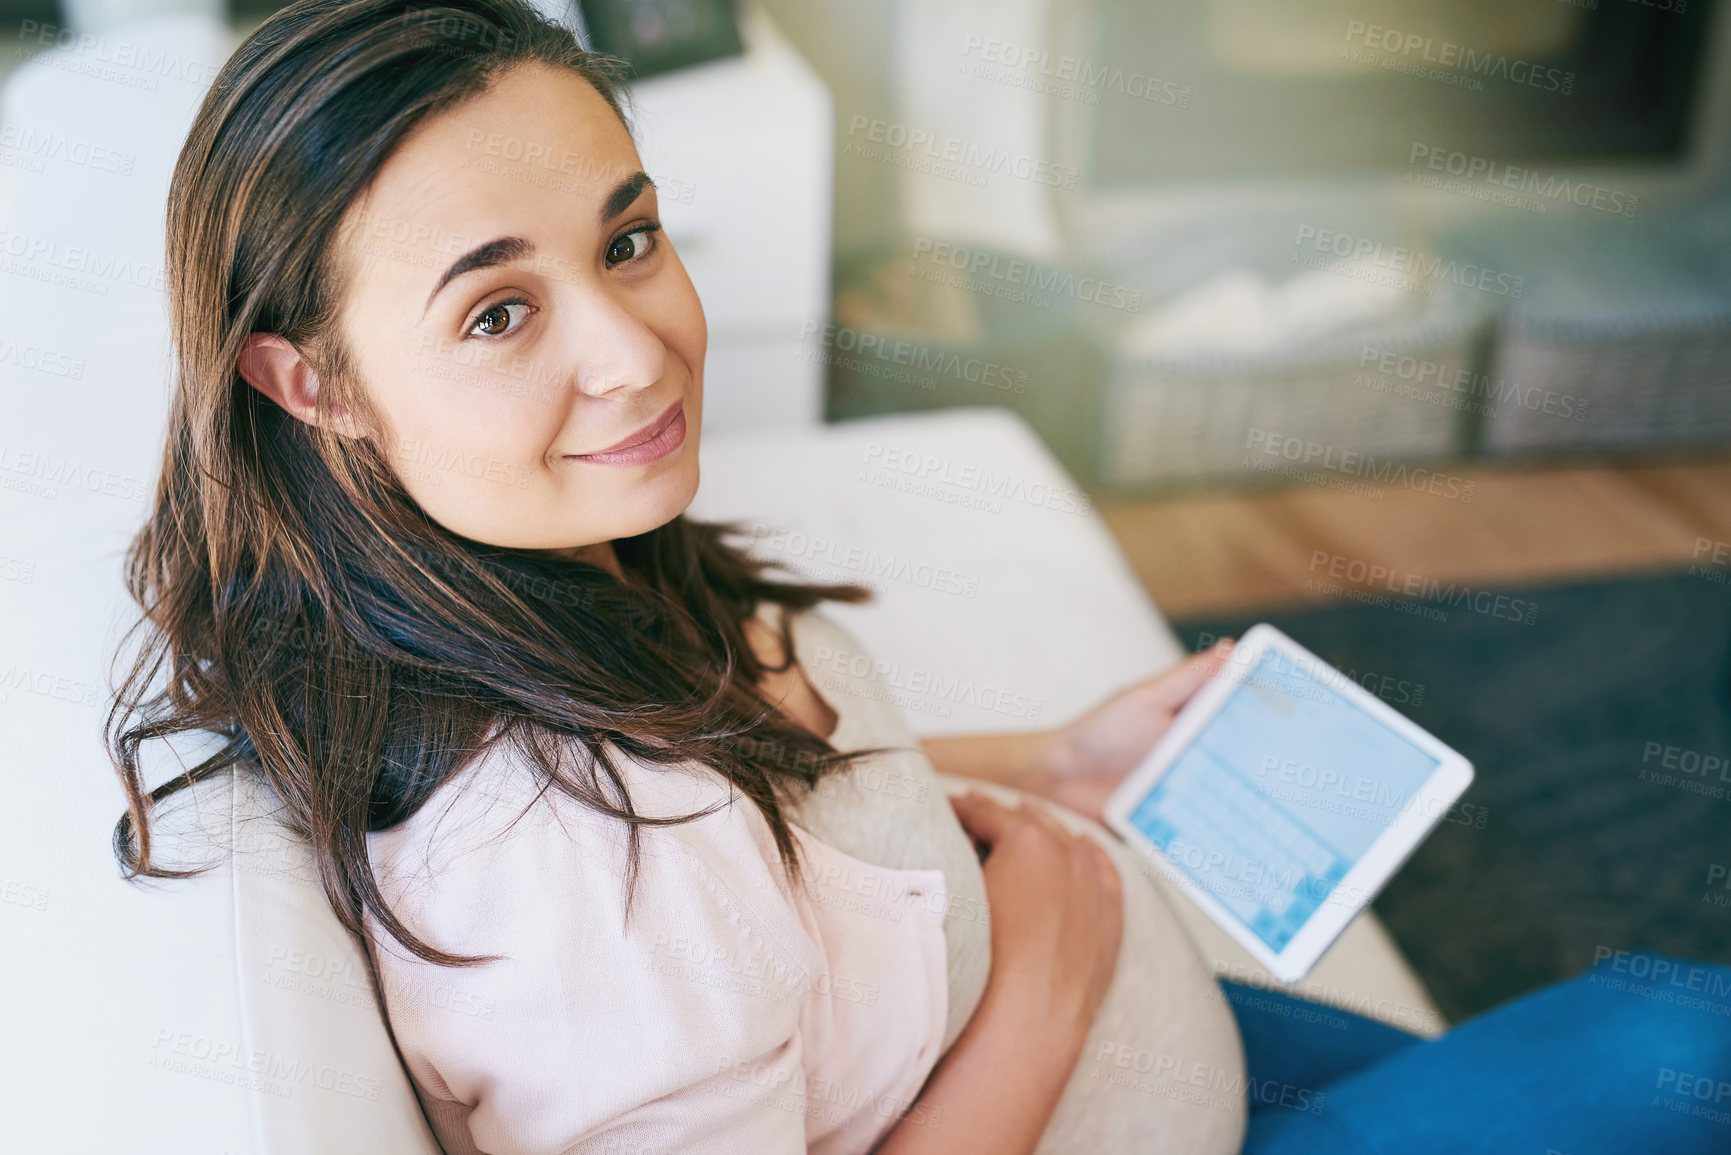 Buy stock photo Cropped portrait of an attractive young pregnant woman working from home